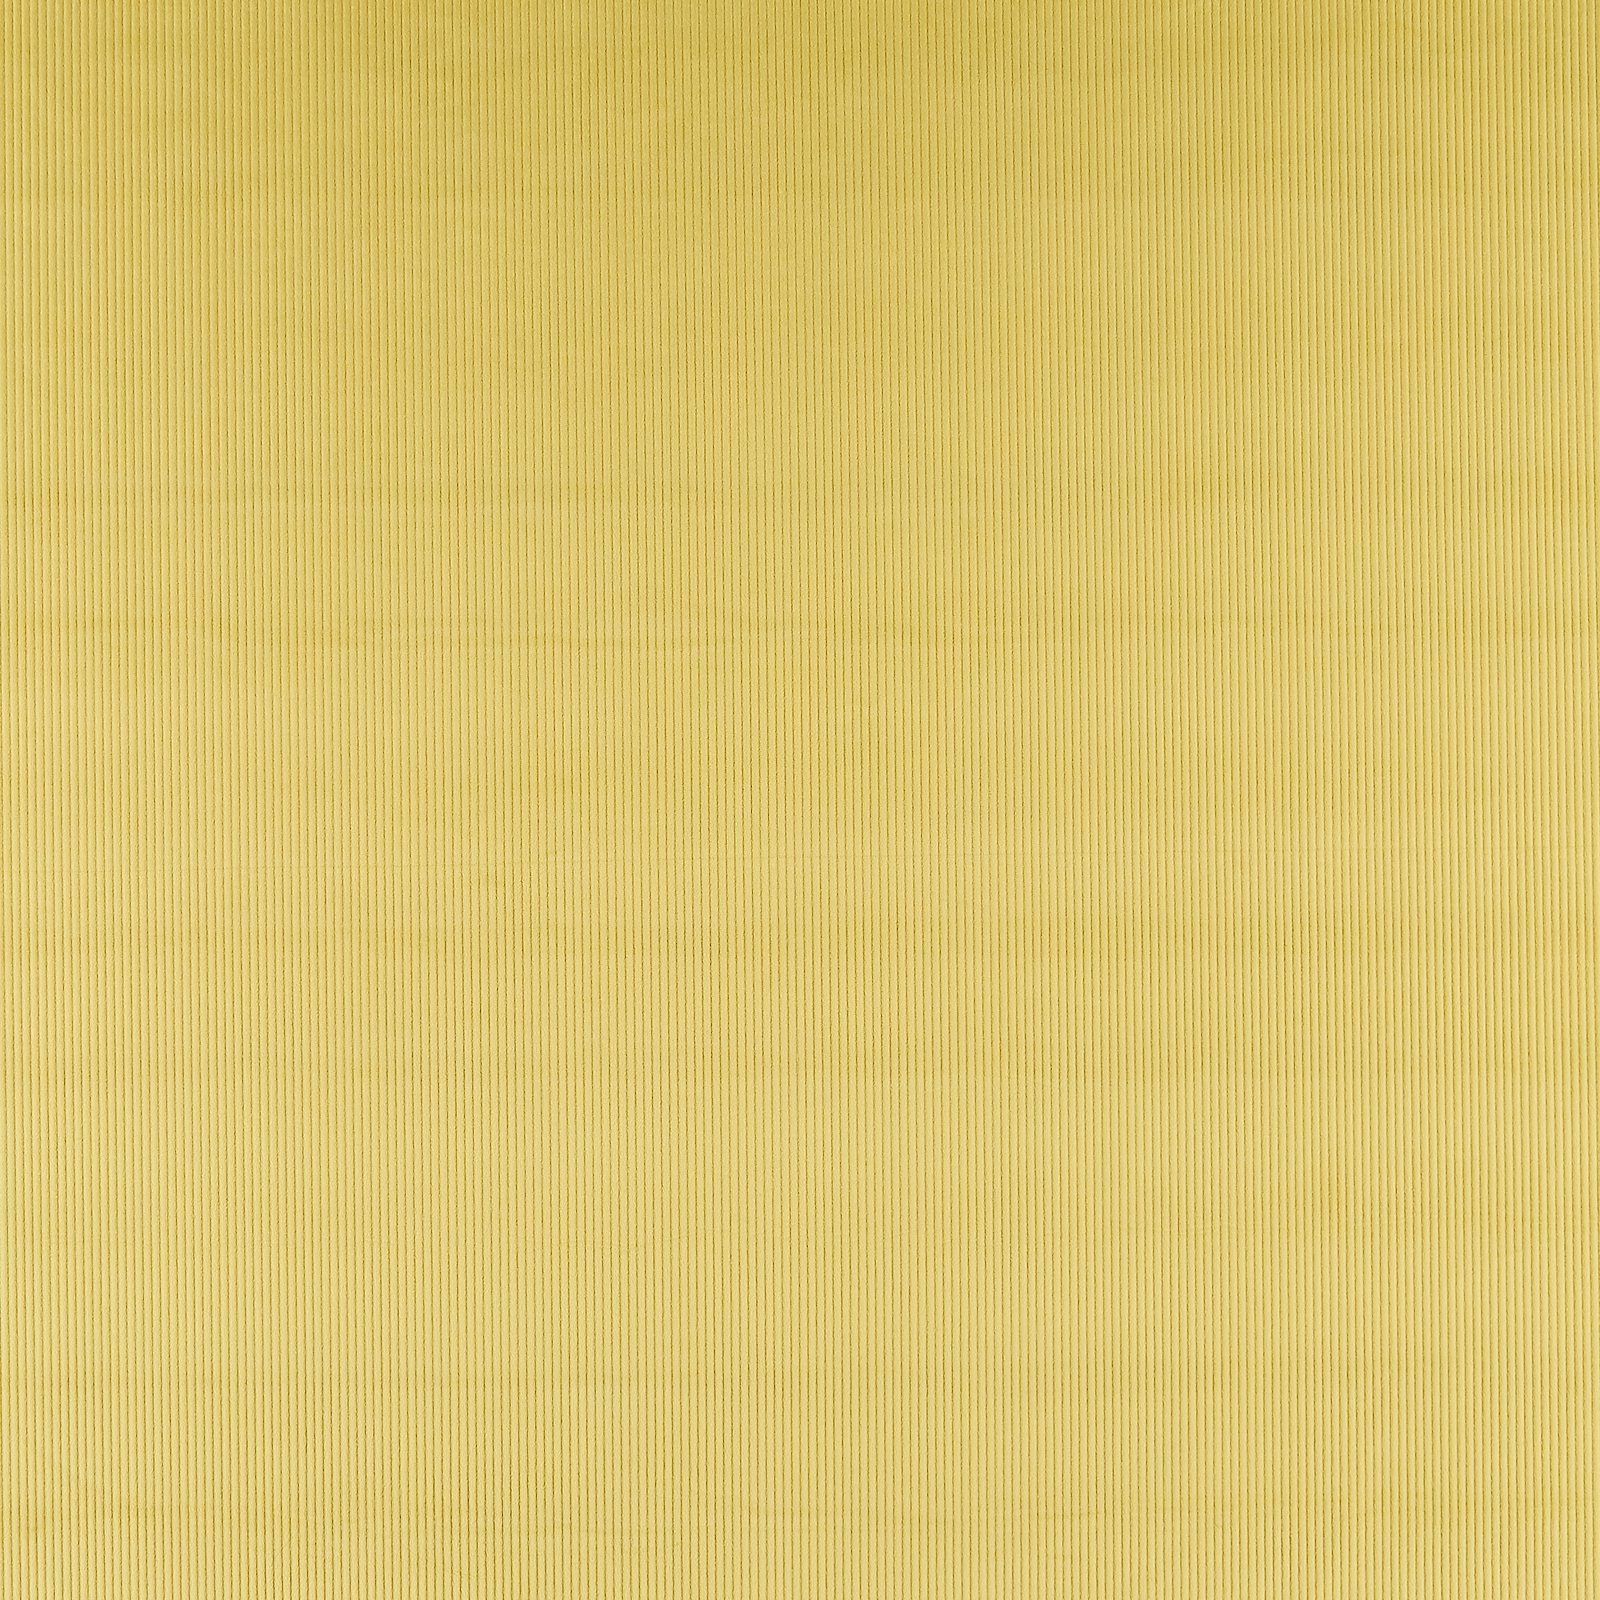 Upholstery micro corduroy 6 wales yellow 826516_pack_solid